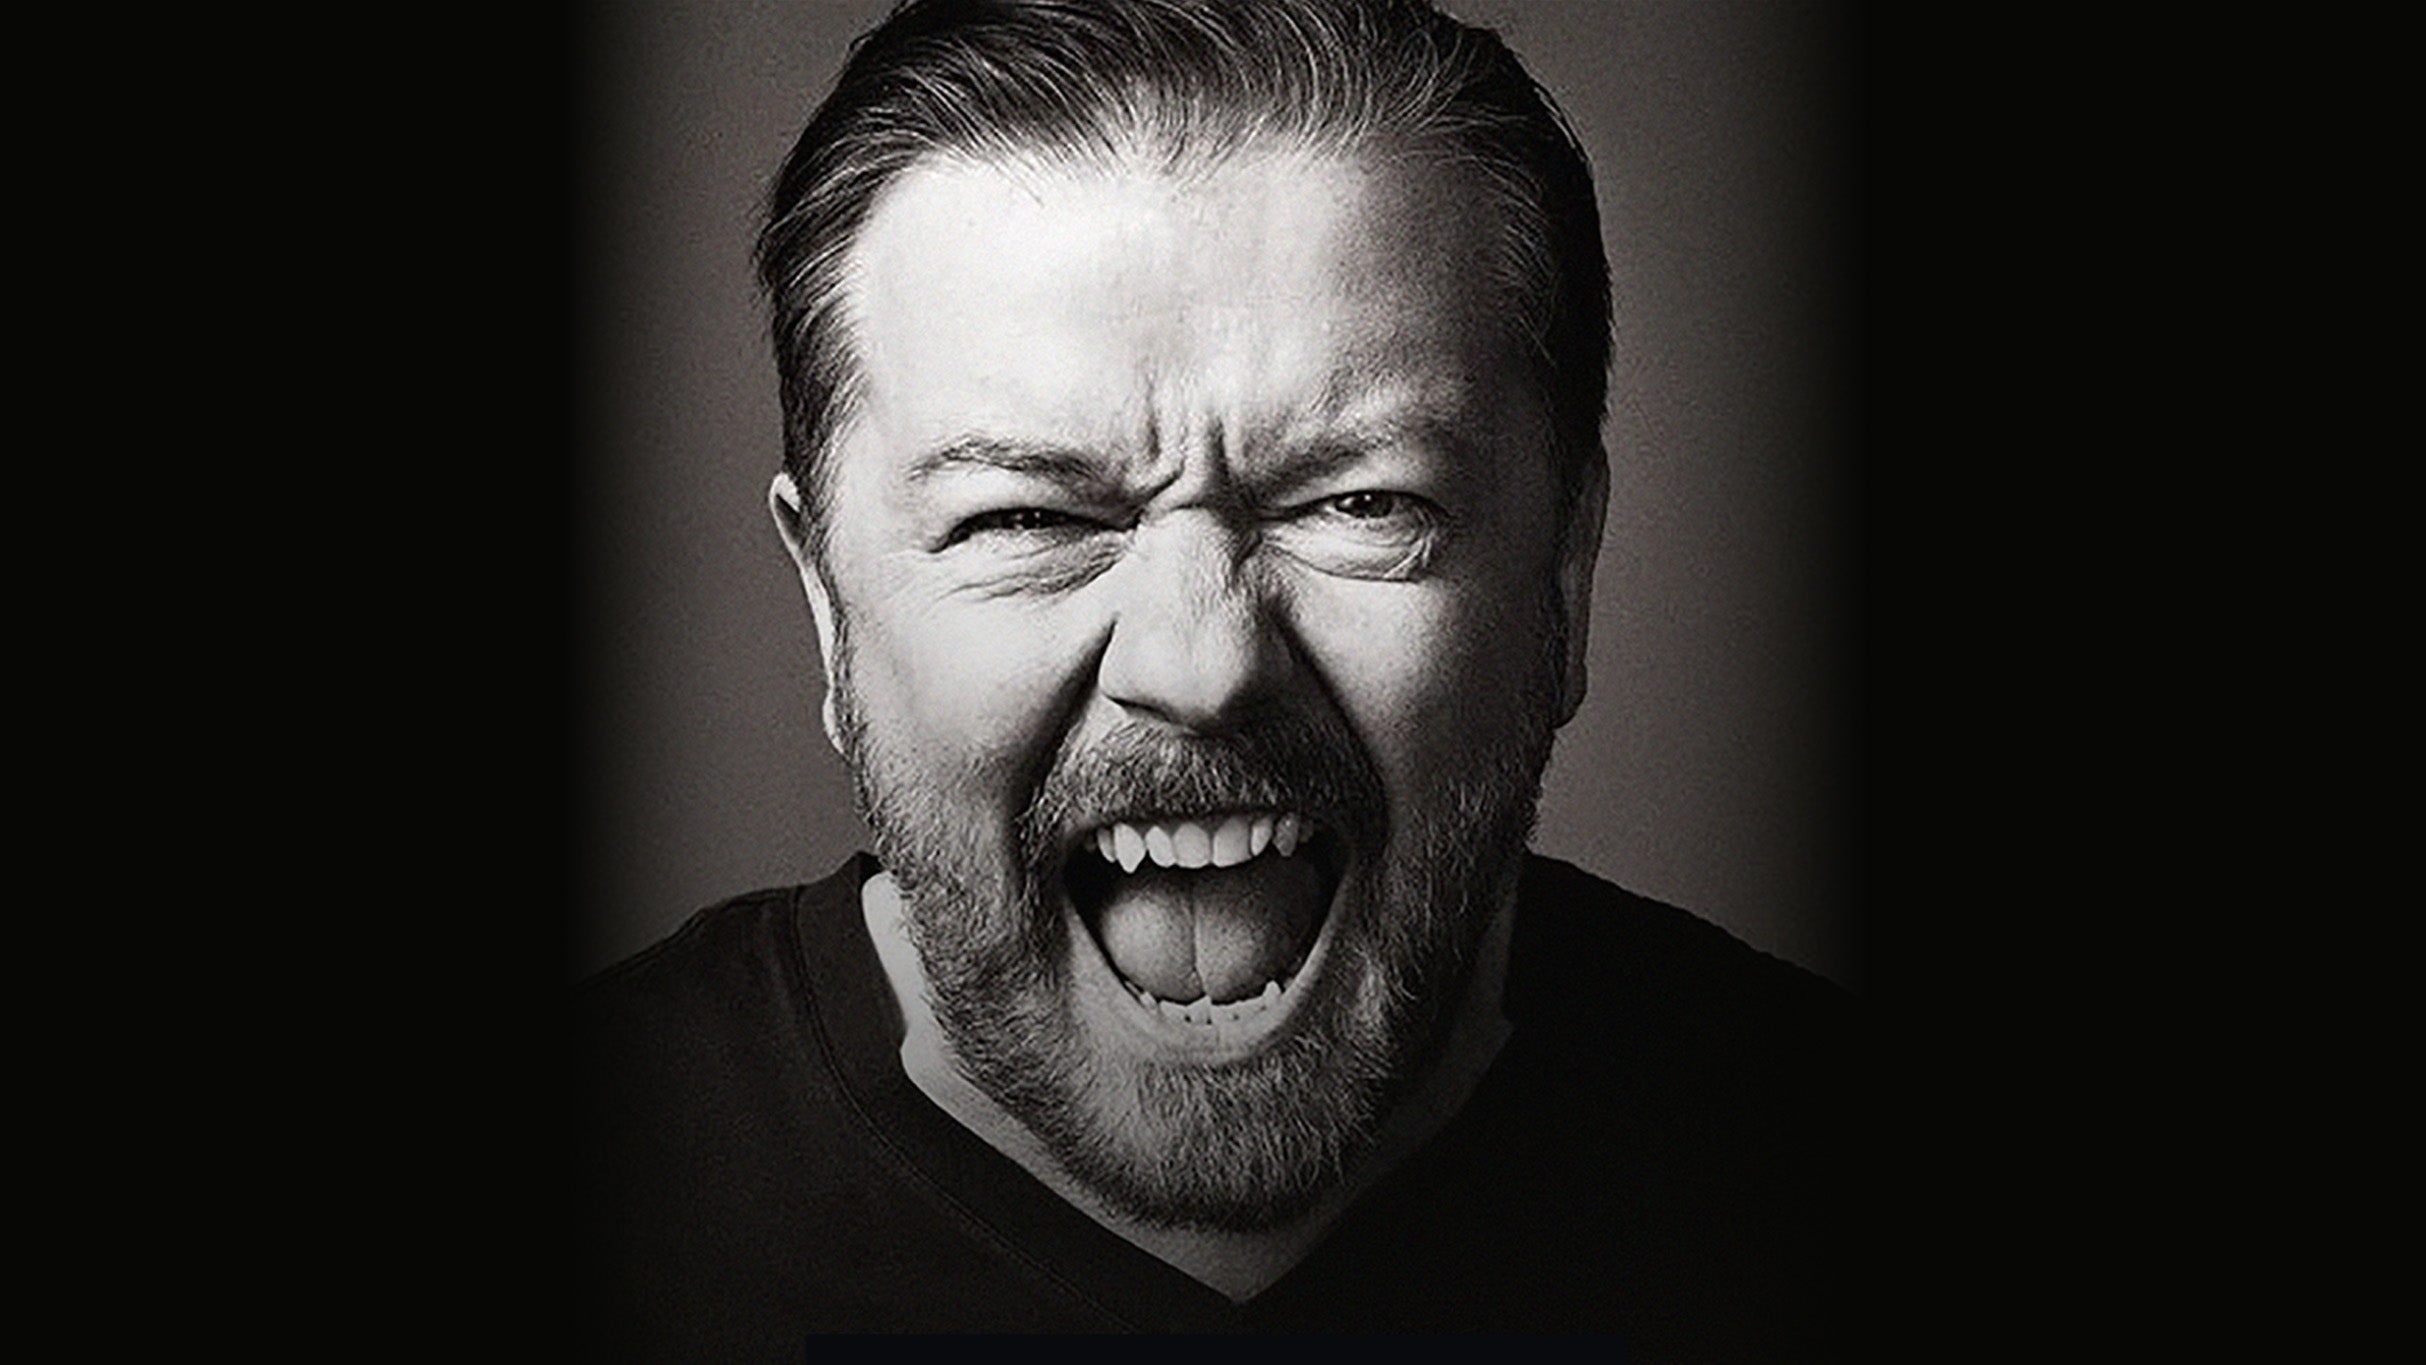 Ricky Gervais: Armageddon free presale password for early tickets in New York